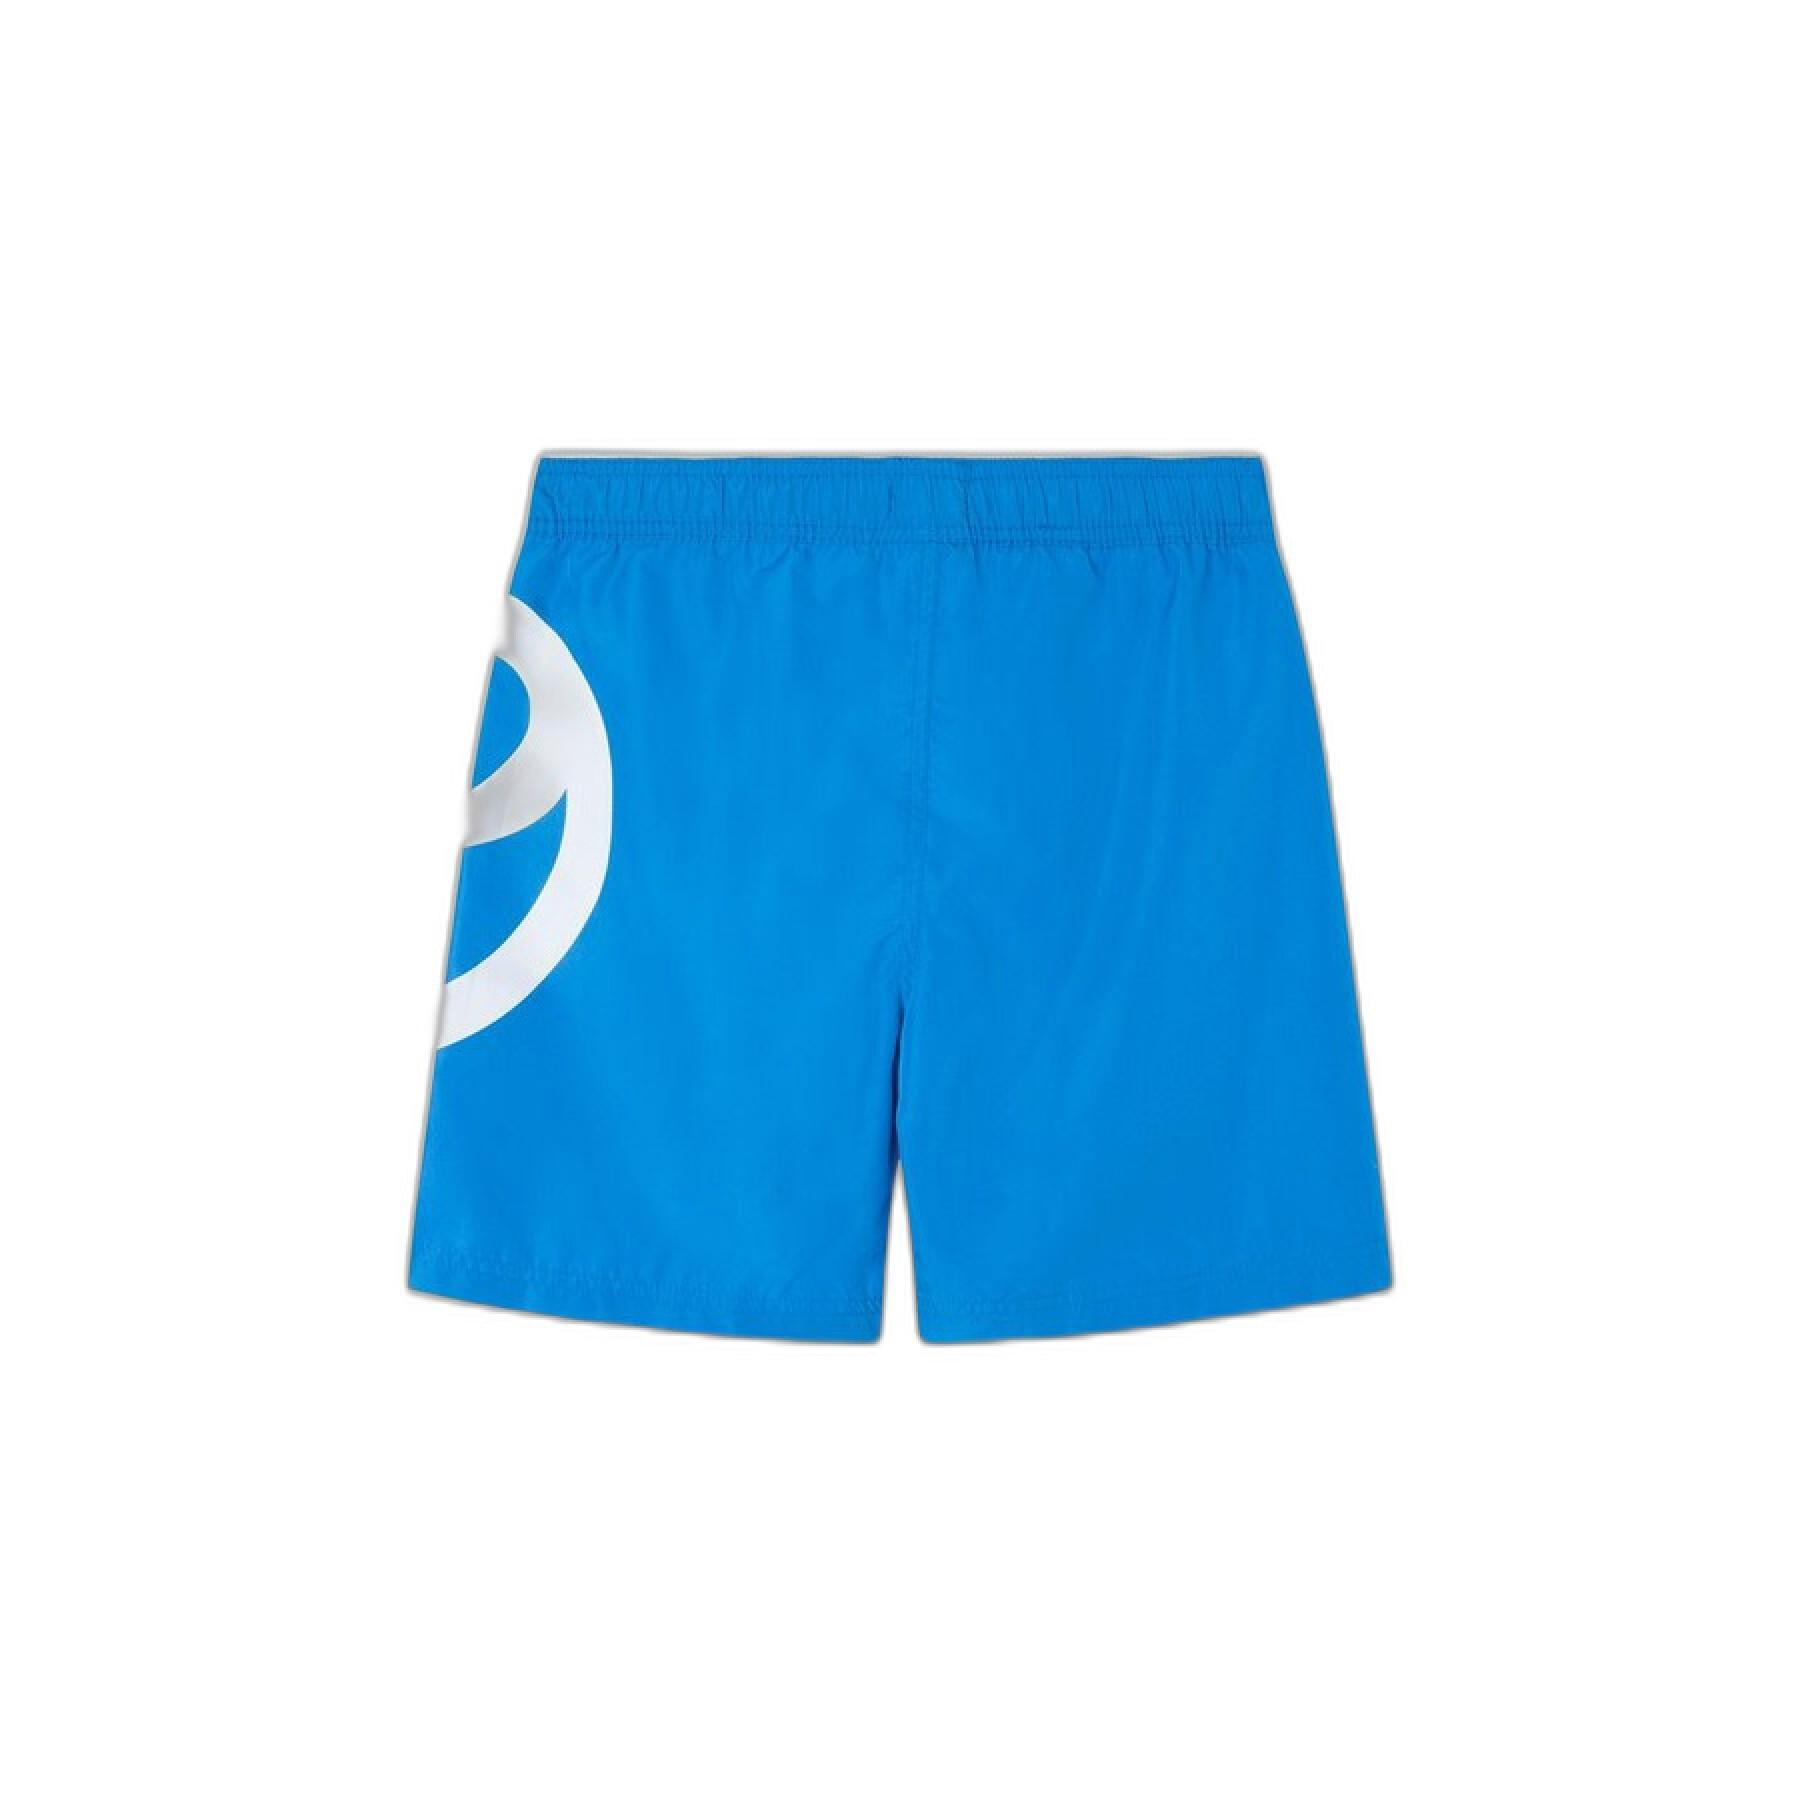 Children's swimming shorts Pepe Jeans Salvador